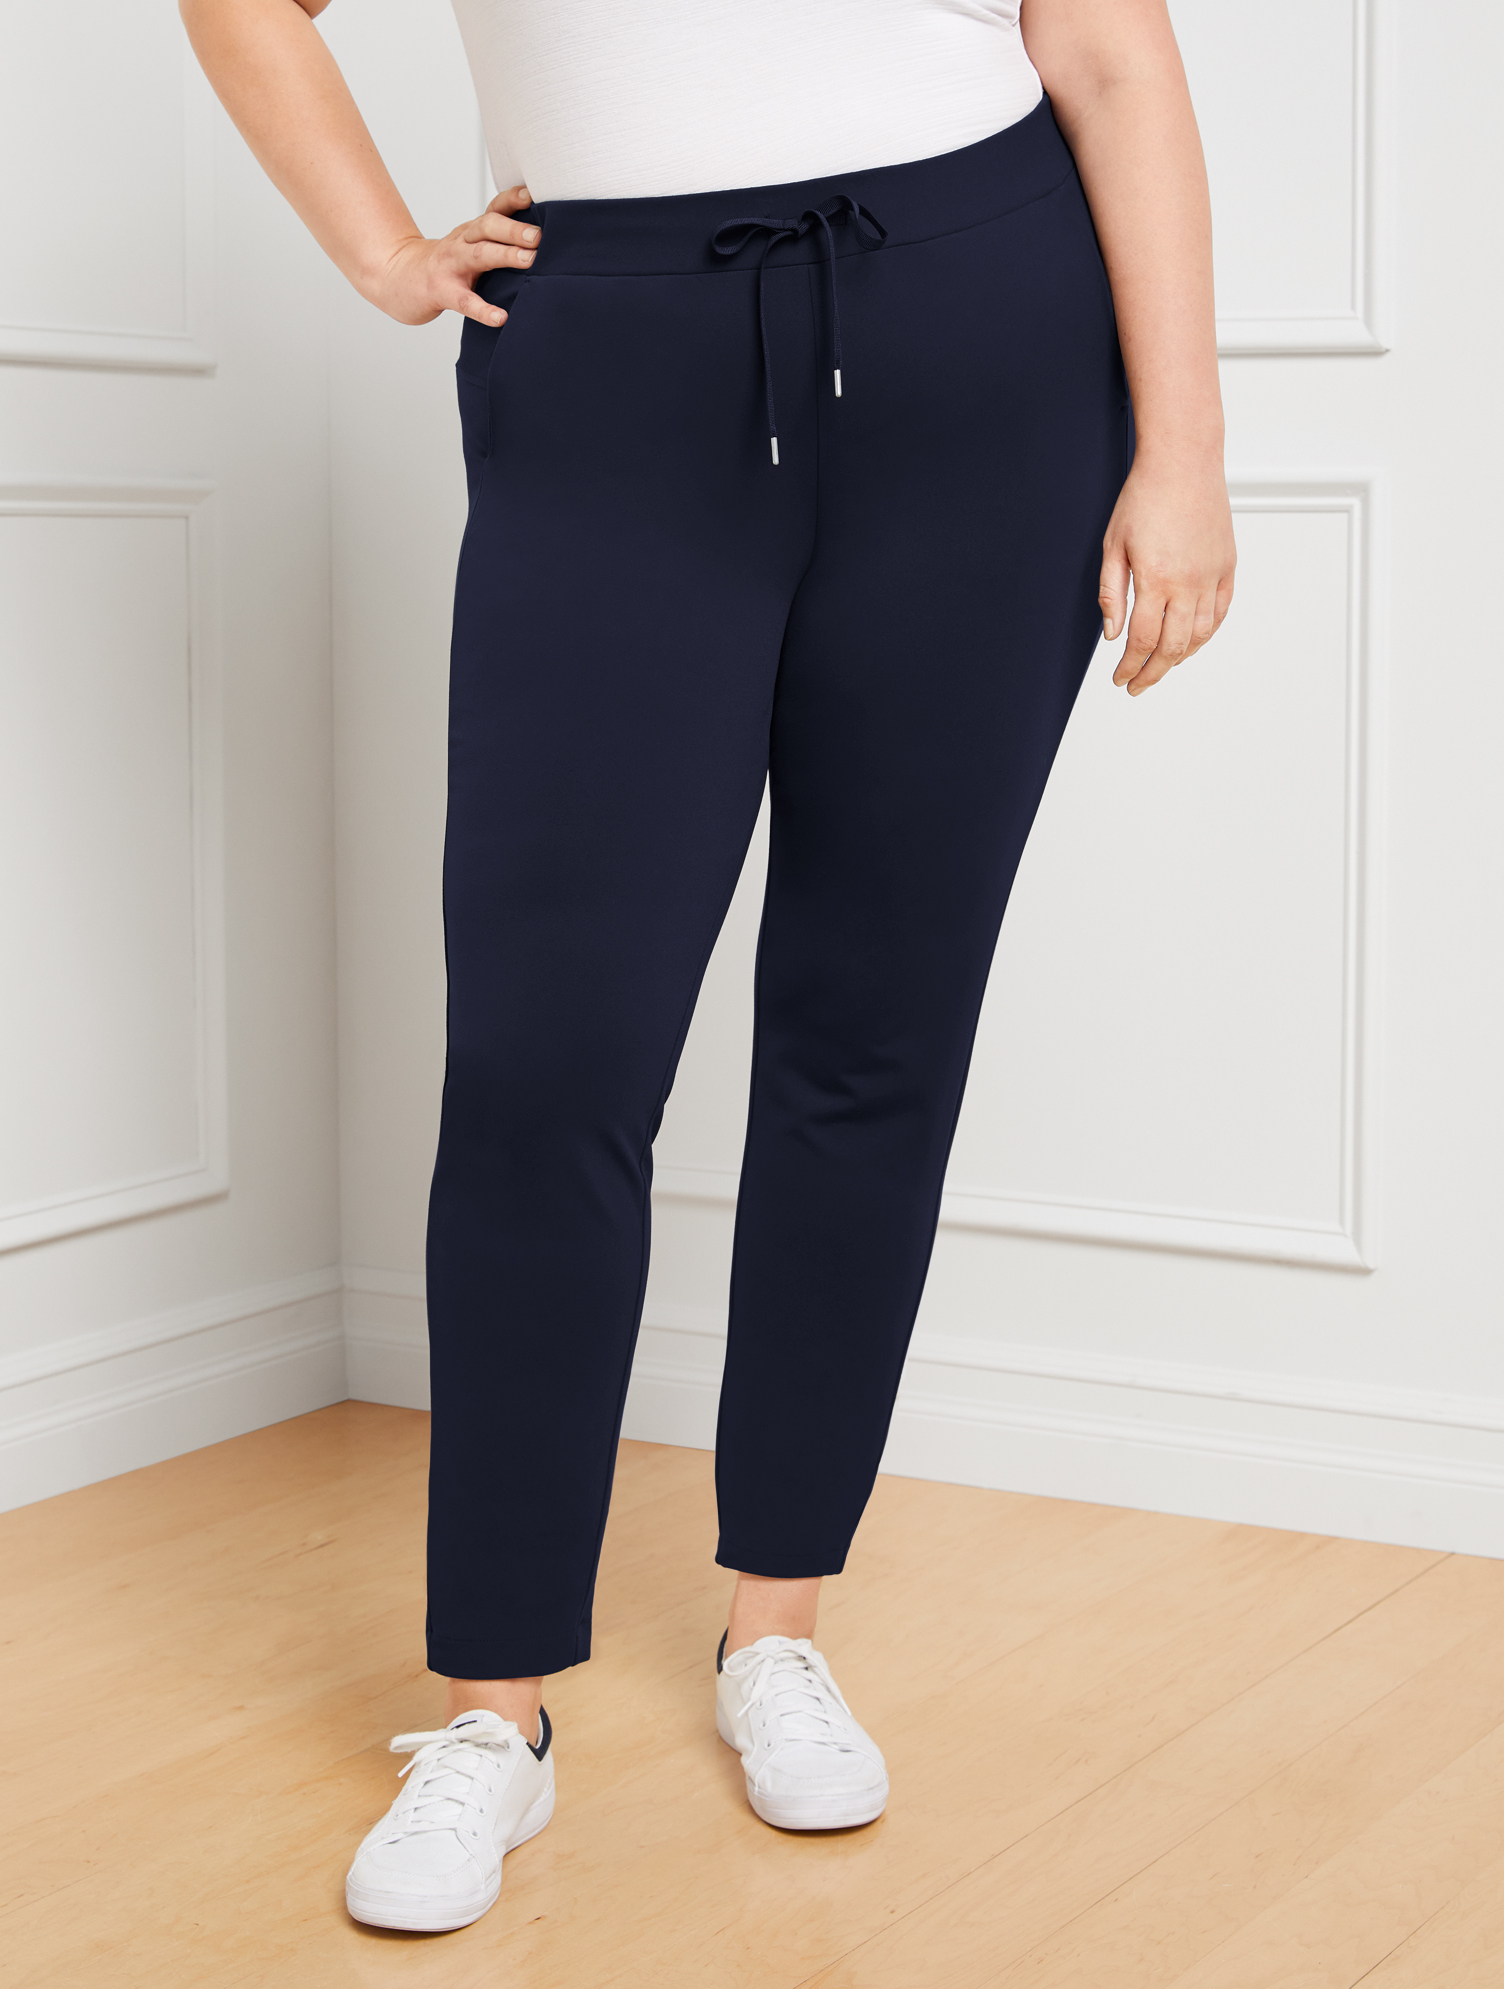 Talbots Out & About Stretch Jogger Pants - Blue - 1x